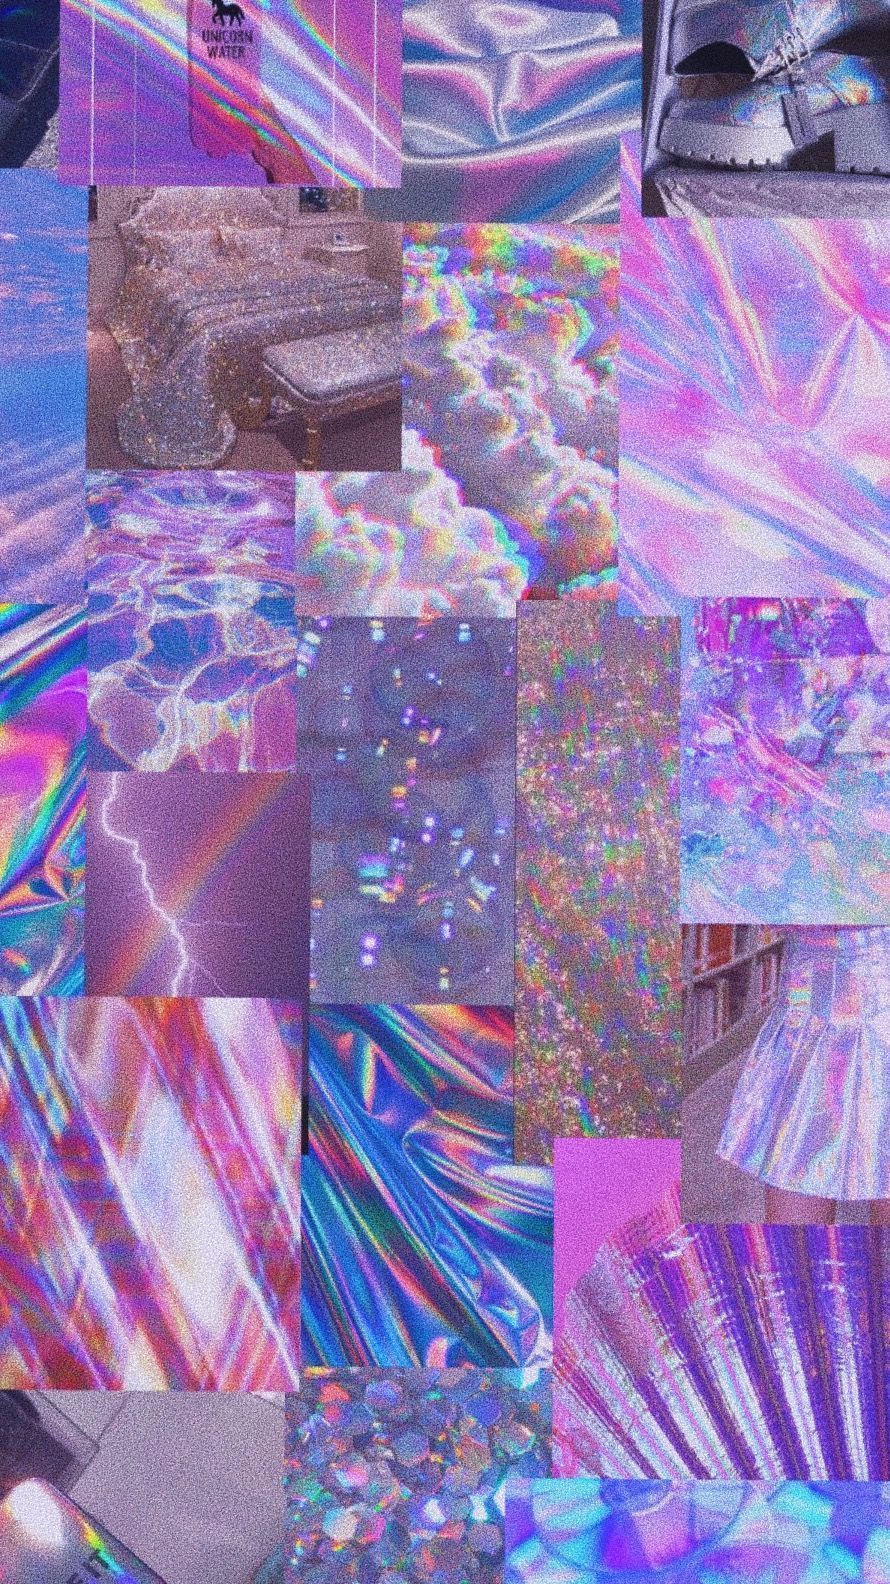 Holographic wallpaper aesthetic. Holographic wallpaper, Purple wallpaper, Aesthetic pastel wallpaper